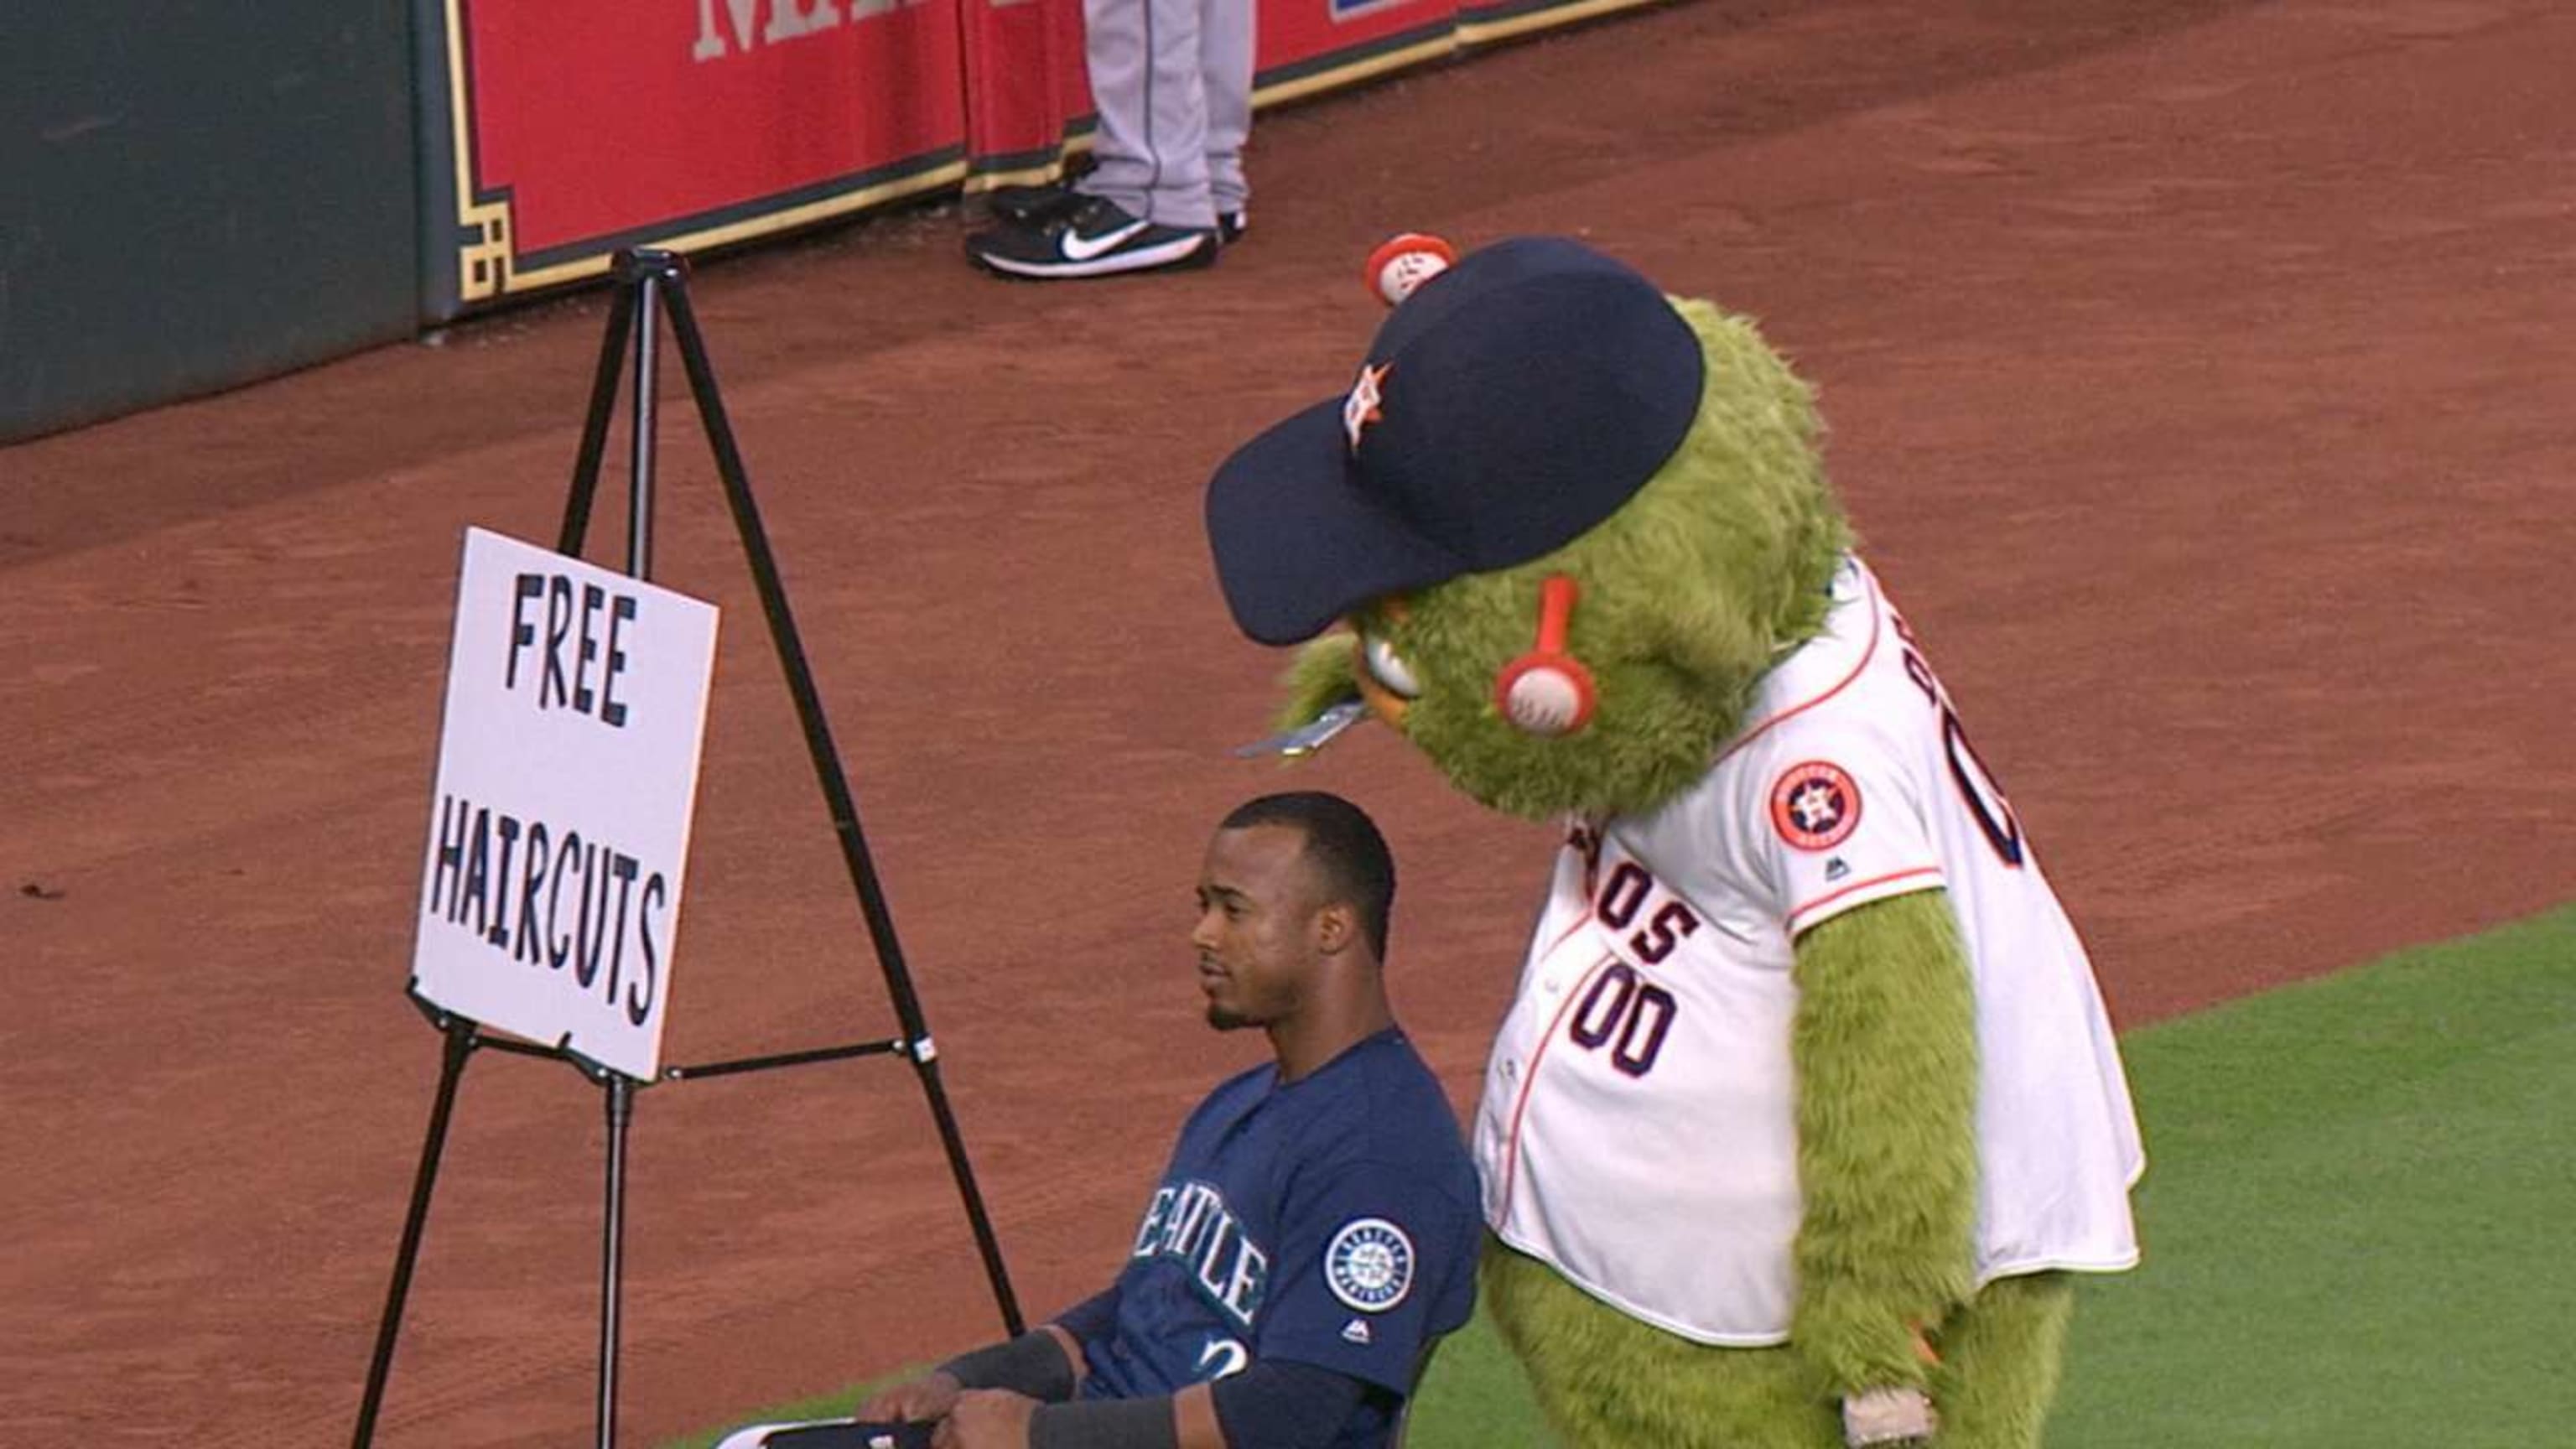 Orbit had a 'Free Haircuts' sign on the field, and the Mariners